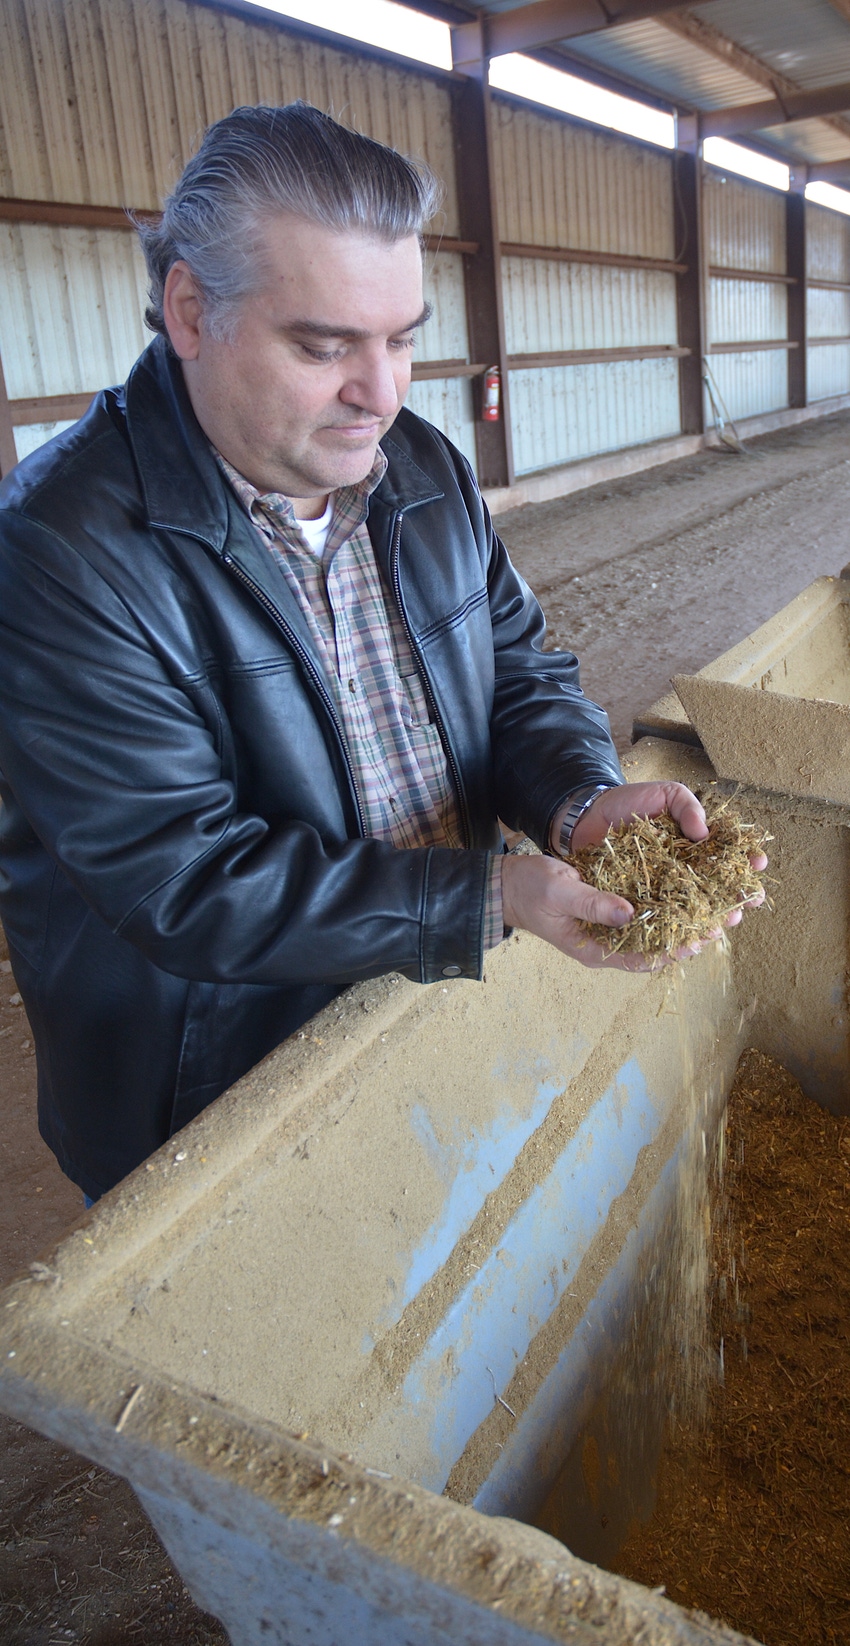 AgriLife Research projects evaluate feeder cattle on yeast/grain diet